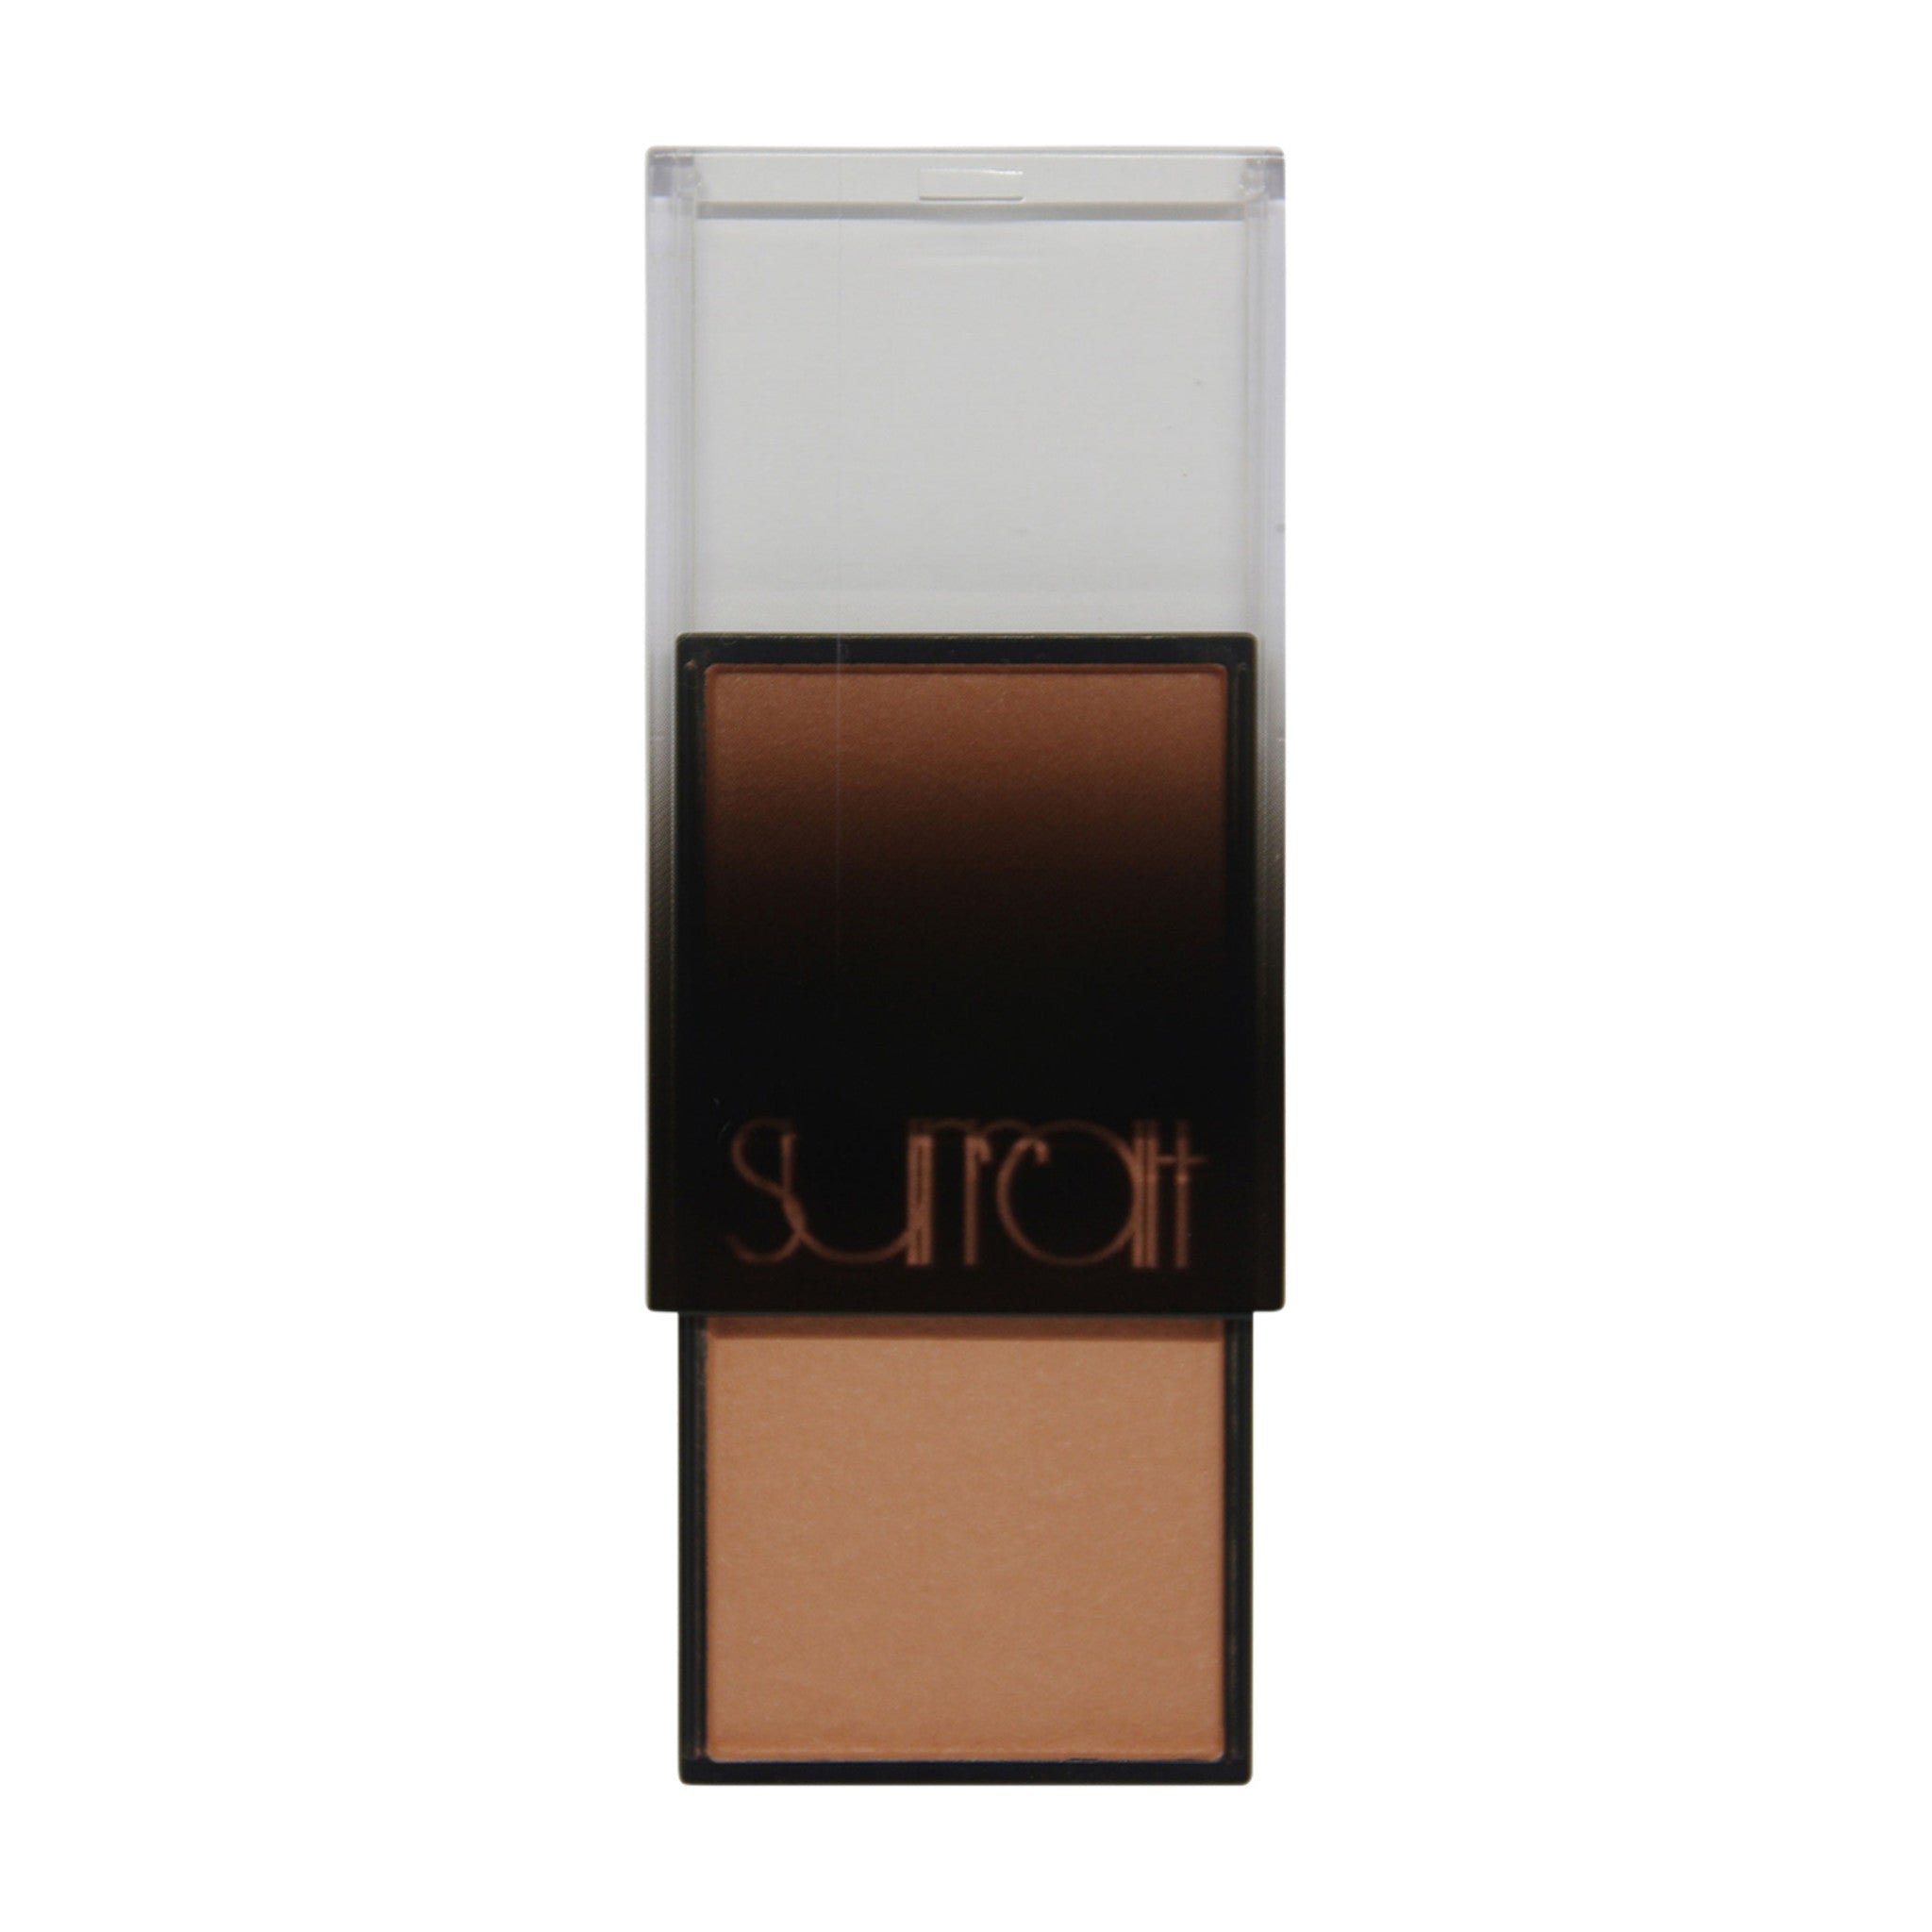 Surratt Artistique Blush Color/Shade variant: Chaleur main image. This product is in the color nude